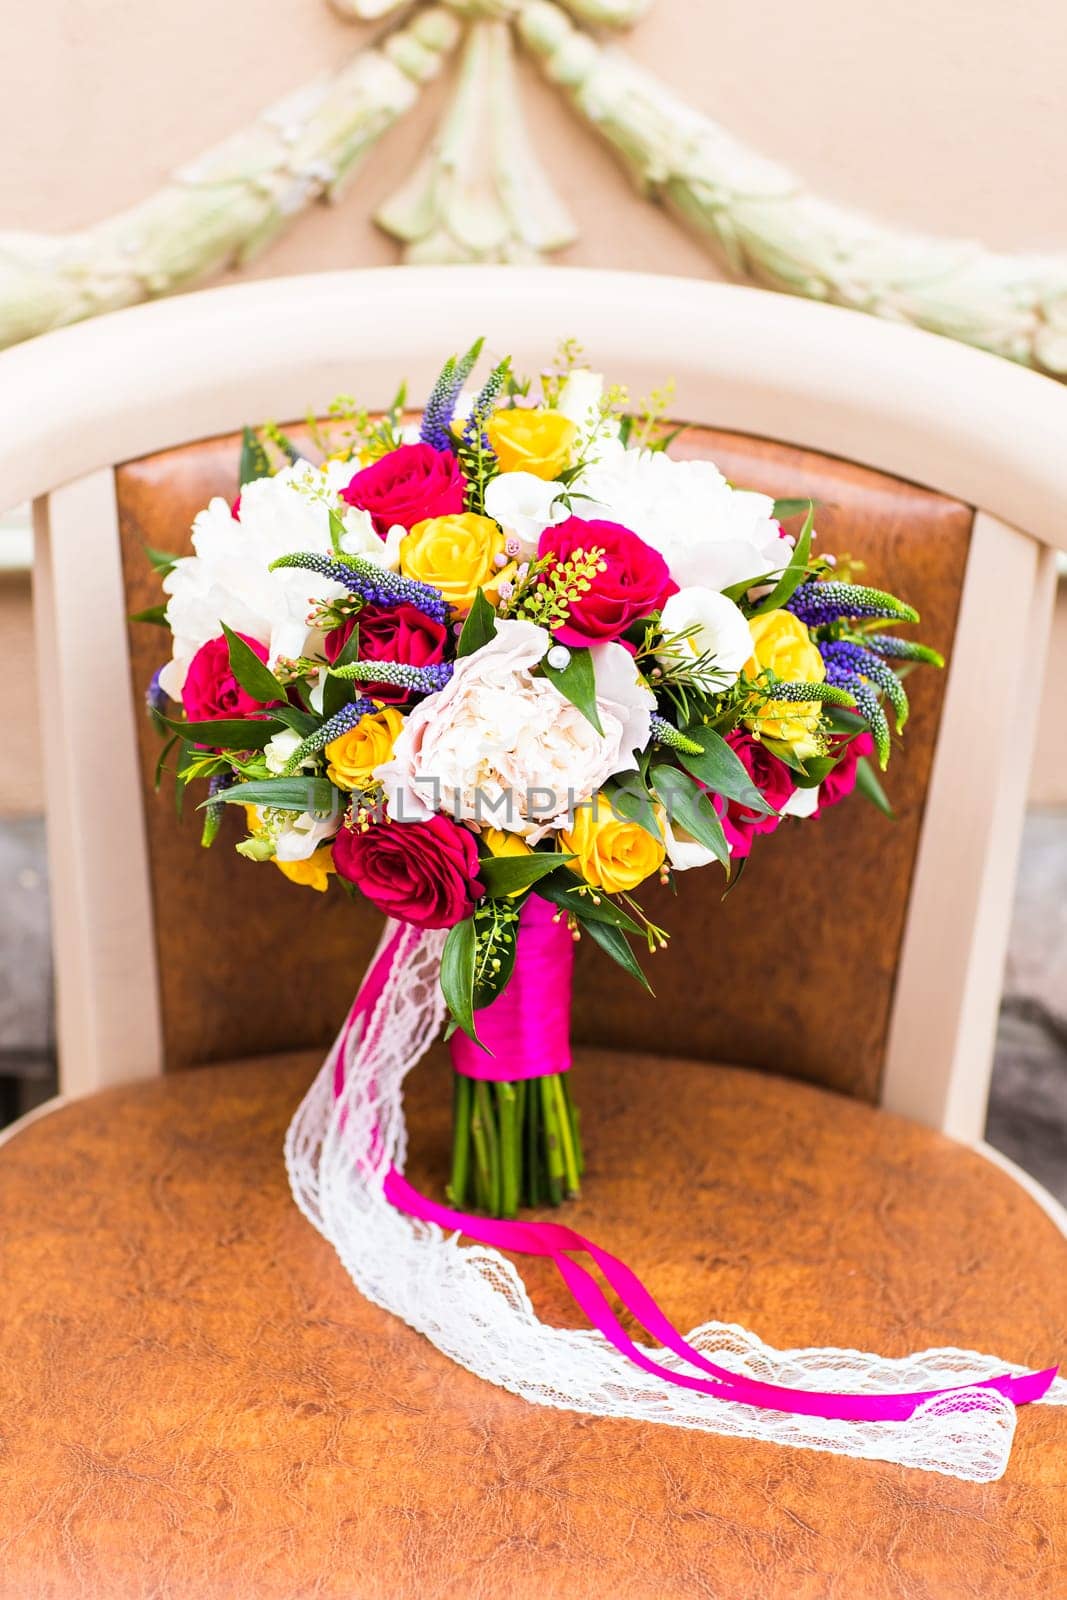 Colorful bridal wedding bouquet by Satura86